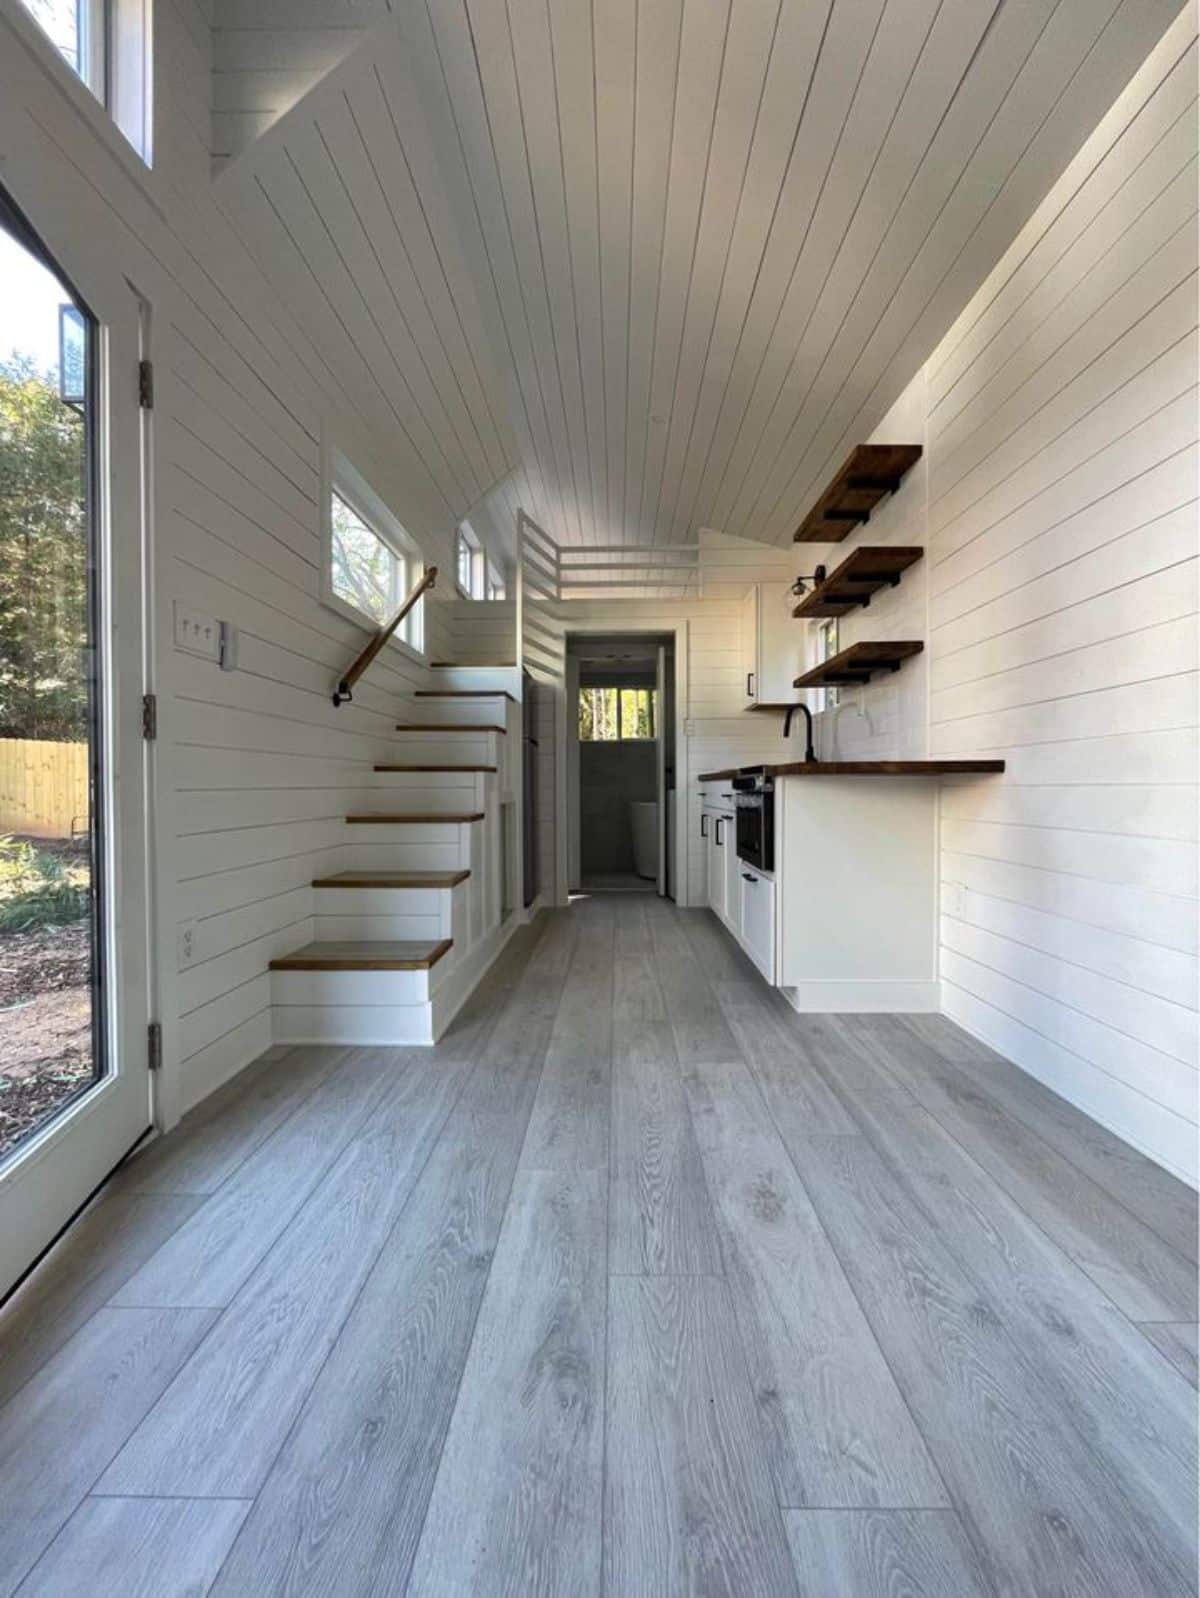 Overall interiors with hardwood flooring and shiplap walls of Certified Tiny House on Wheels from living room view